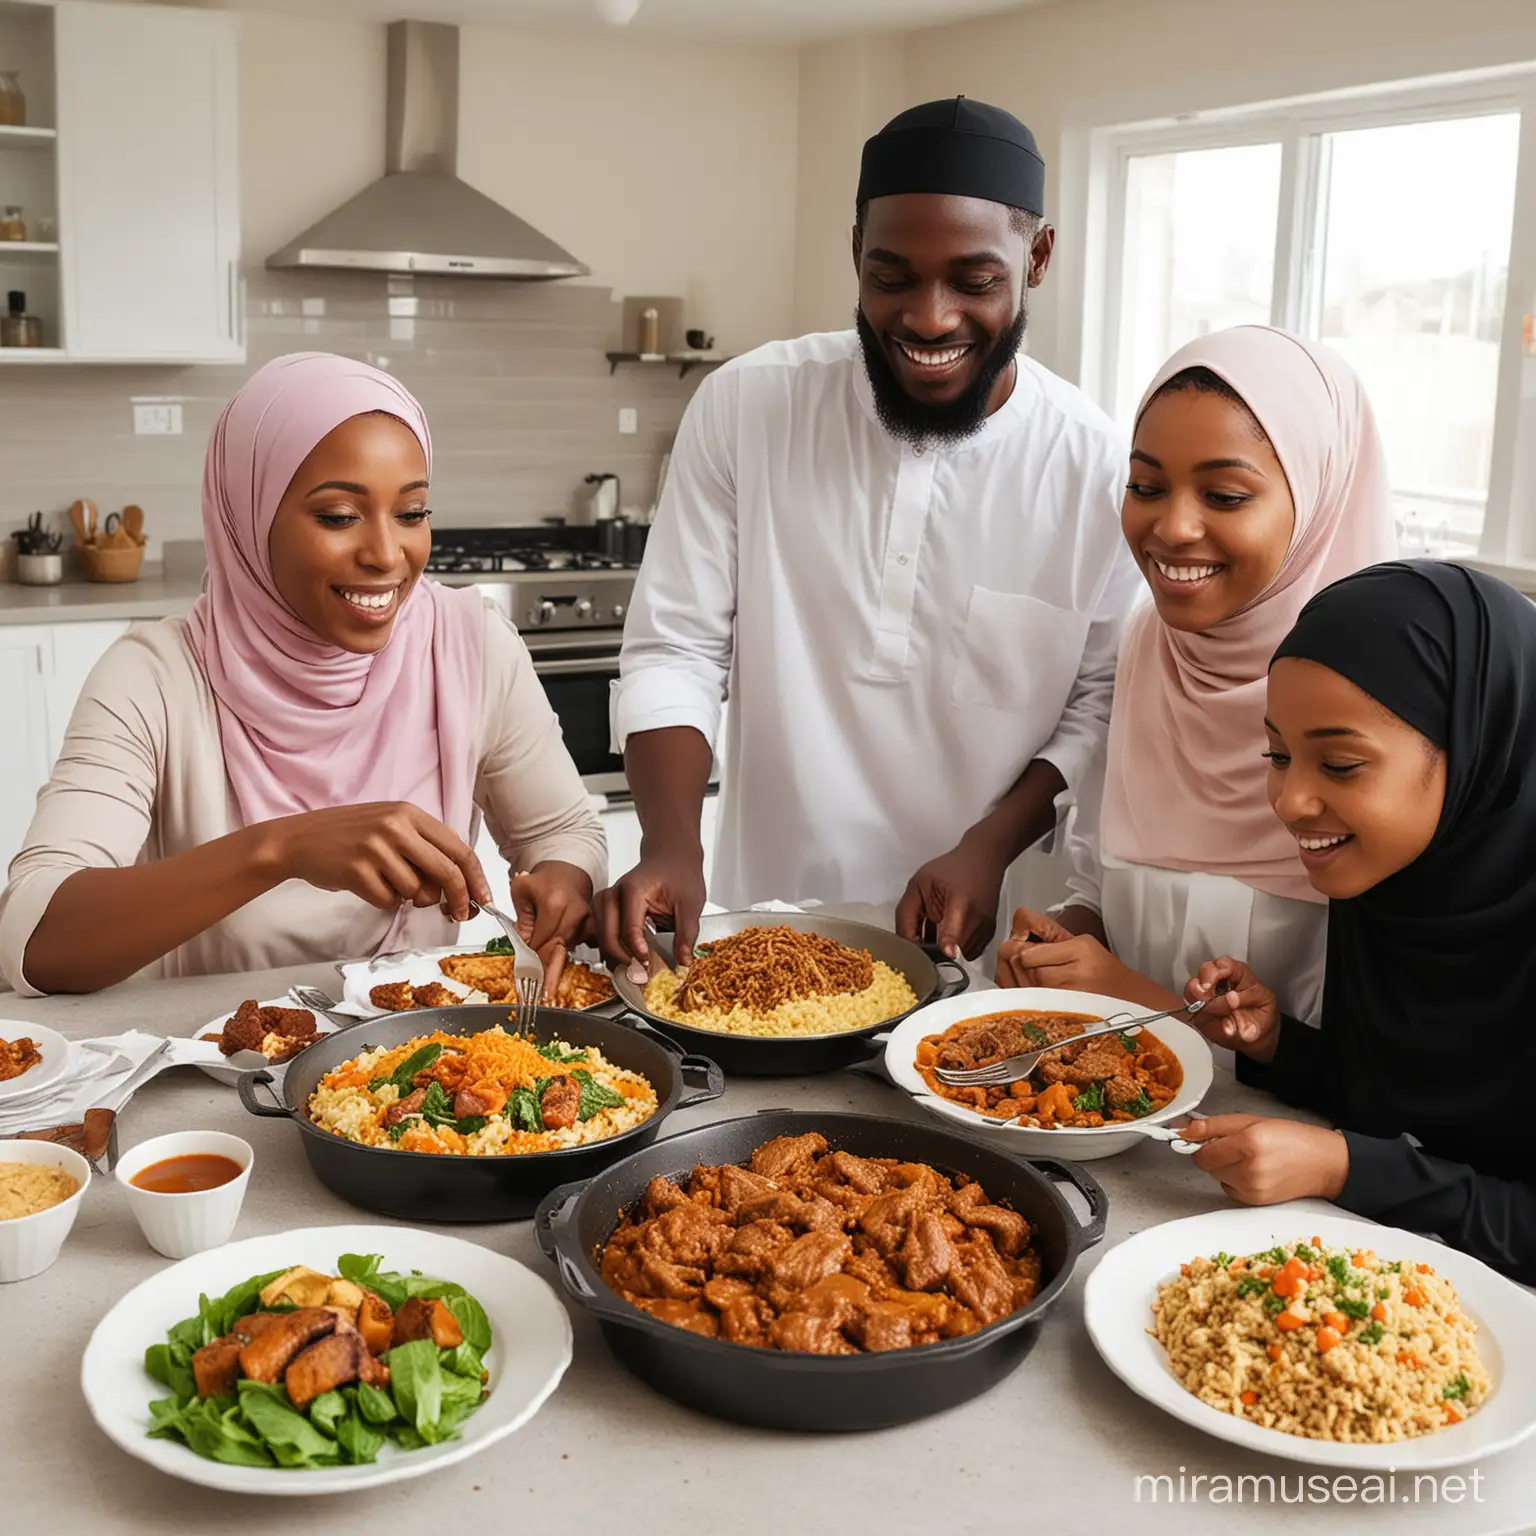 Black Muslim Family Enjoying Homecooked Meal Together